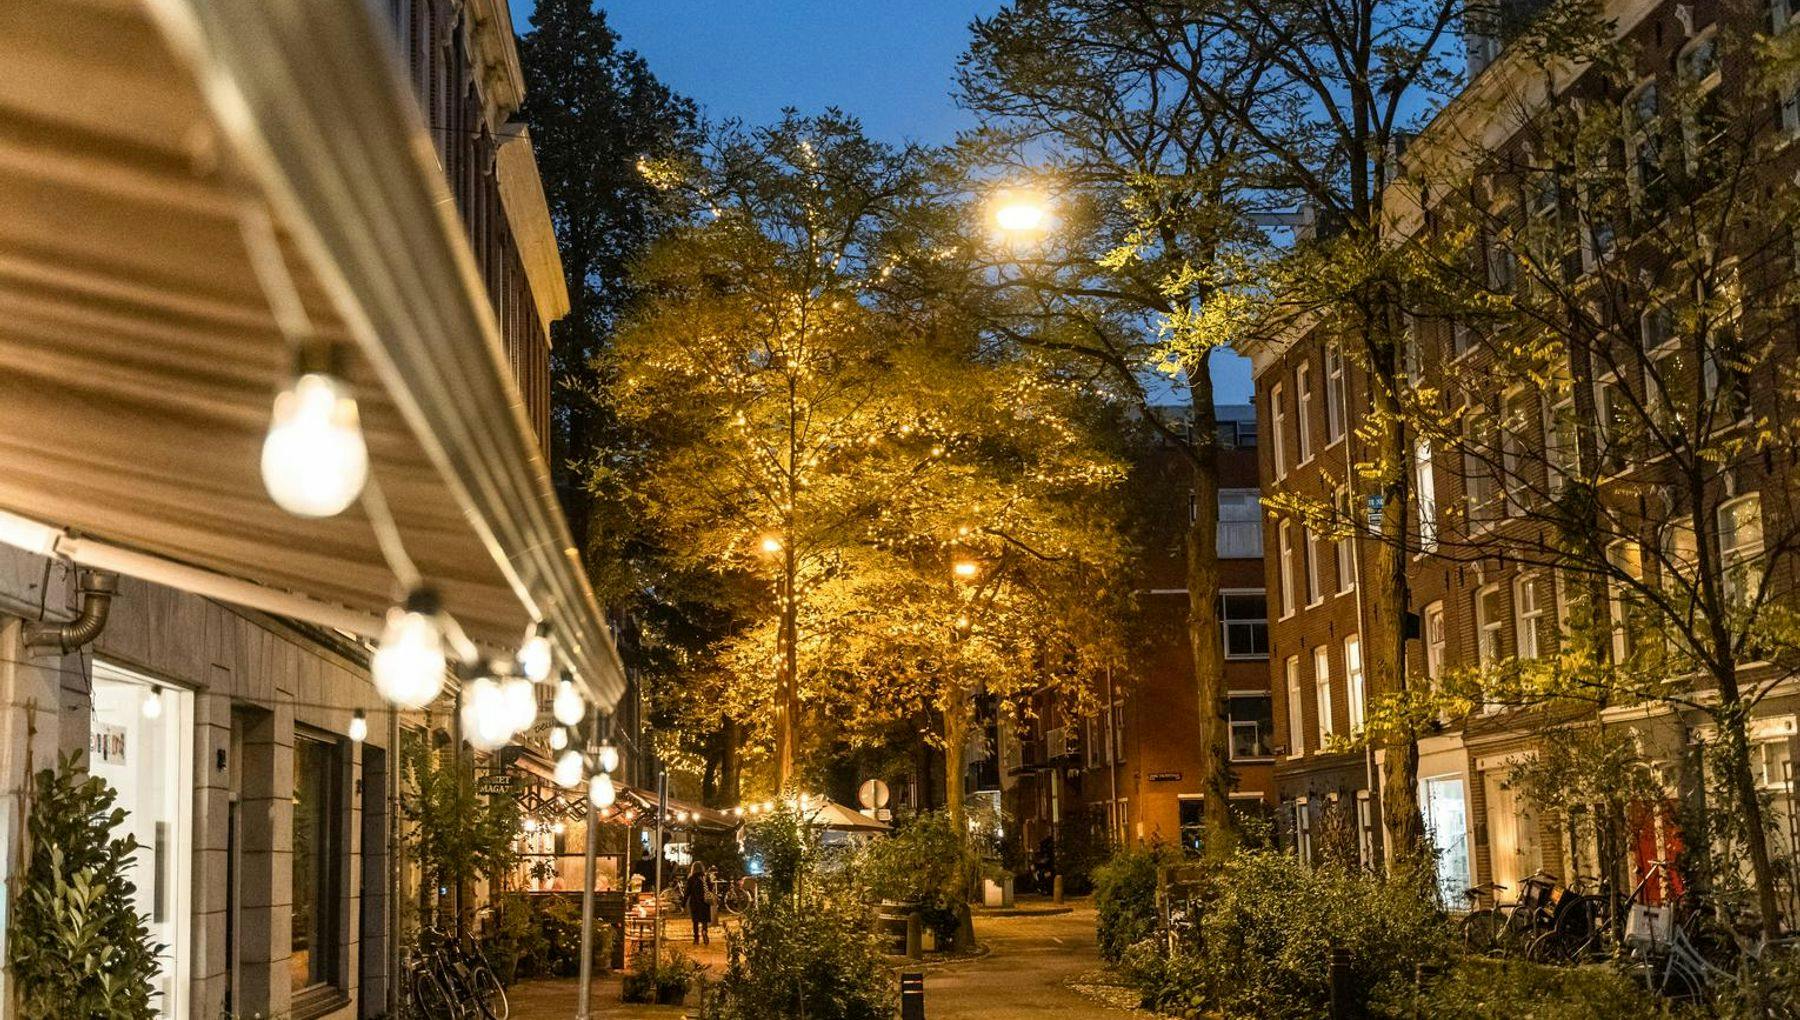 The Frans Halsstraat in De Pijp at night (with cafes and houses)